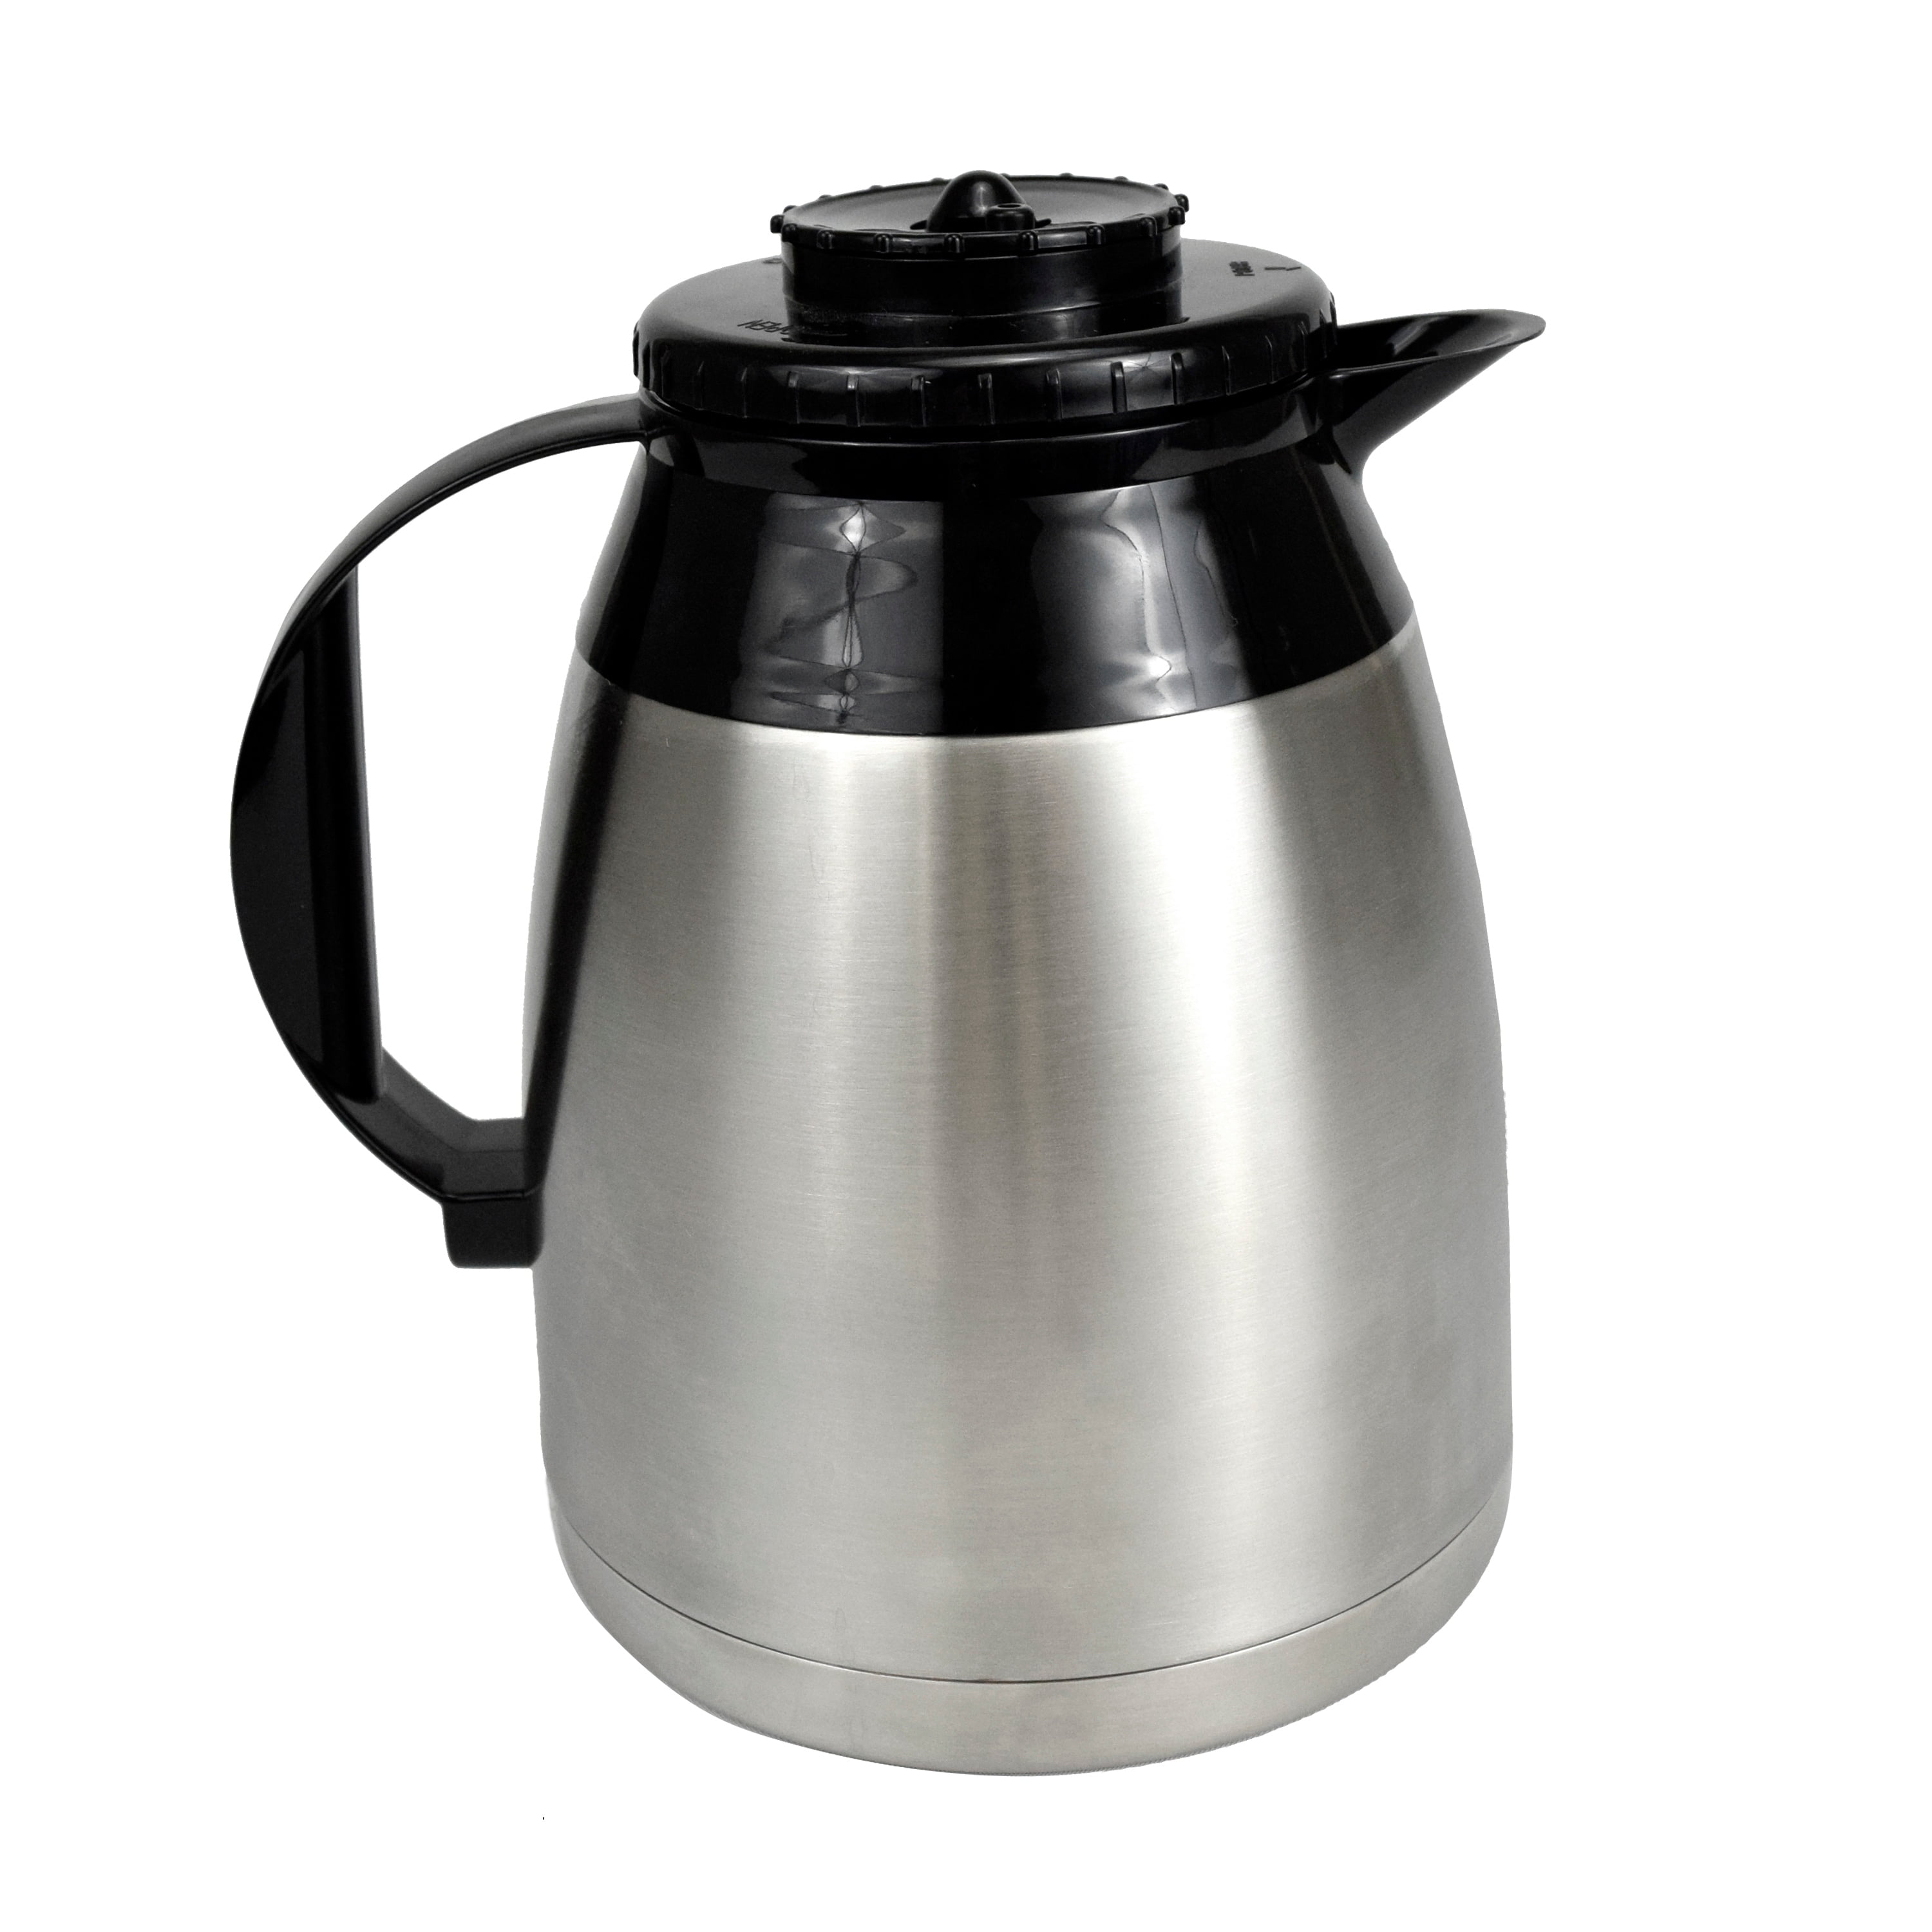 ThermalPro Sublimation Coffee Carafe 1L Double Wall Flask, Stainless Steel,  Vacuum Insulated, 27oz & 32oz Capacity Ideal For Customization And Beverage  Preservation From Hc_network005, $5.43